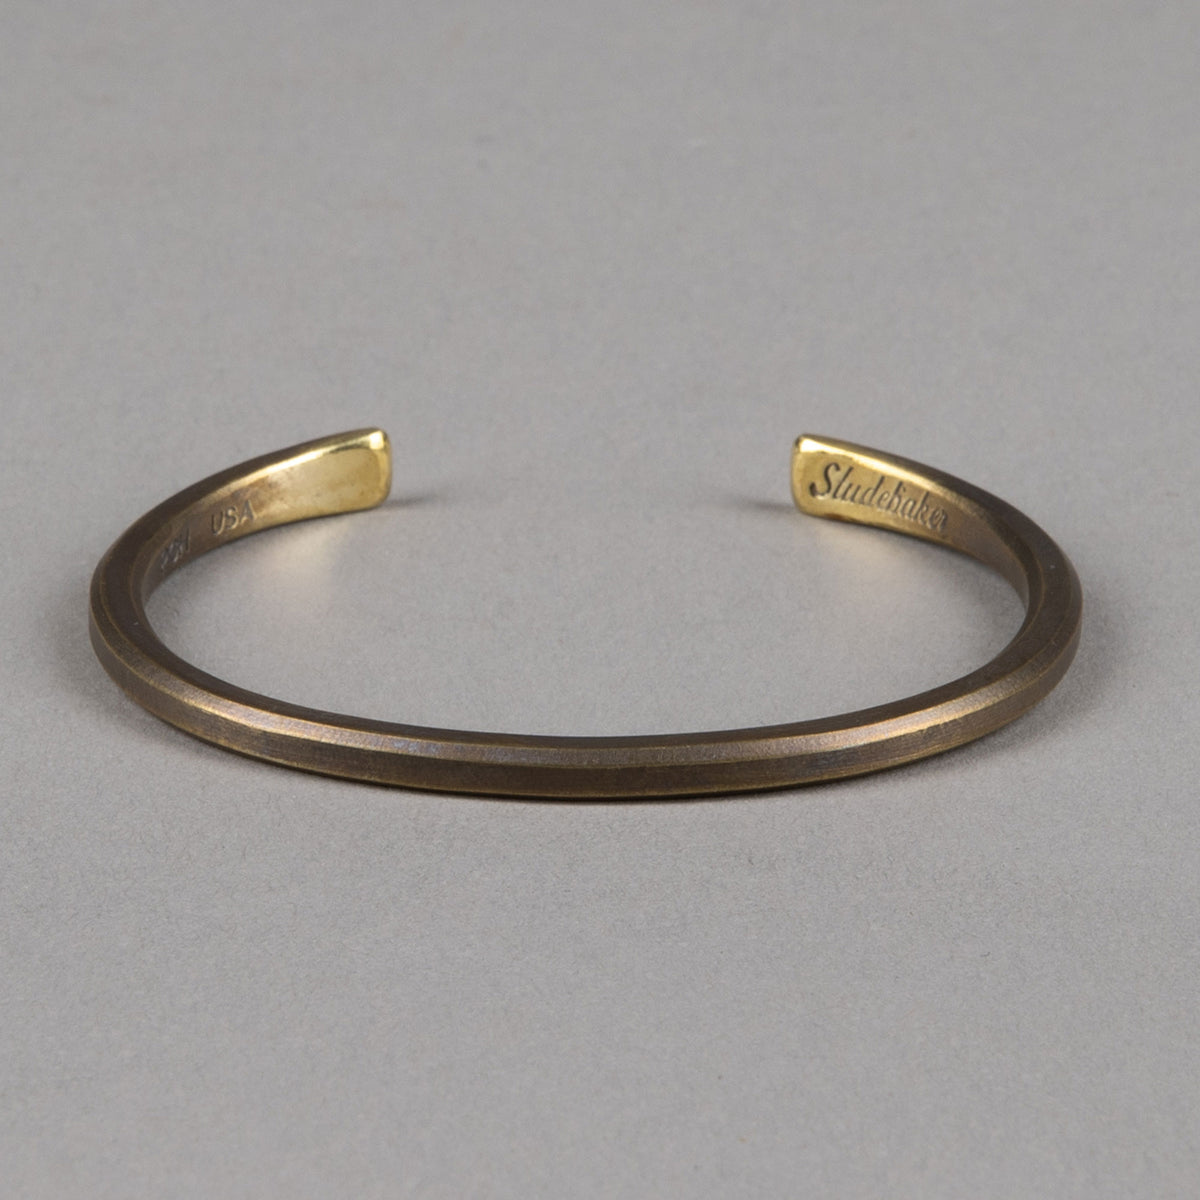 "Classic" Cuff - Messing Armreif